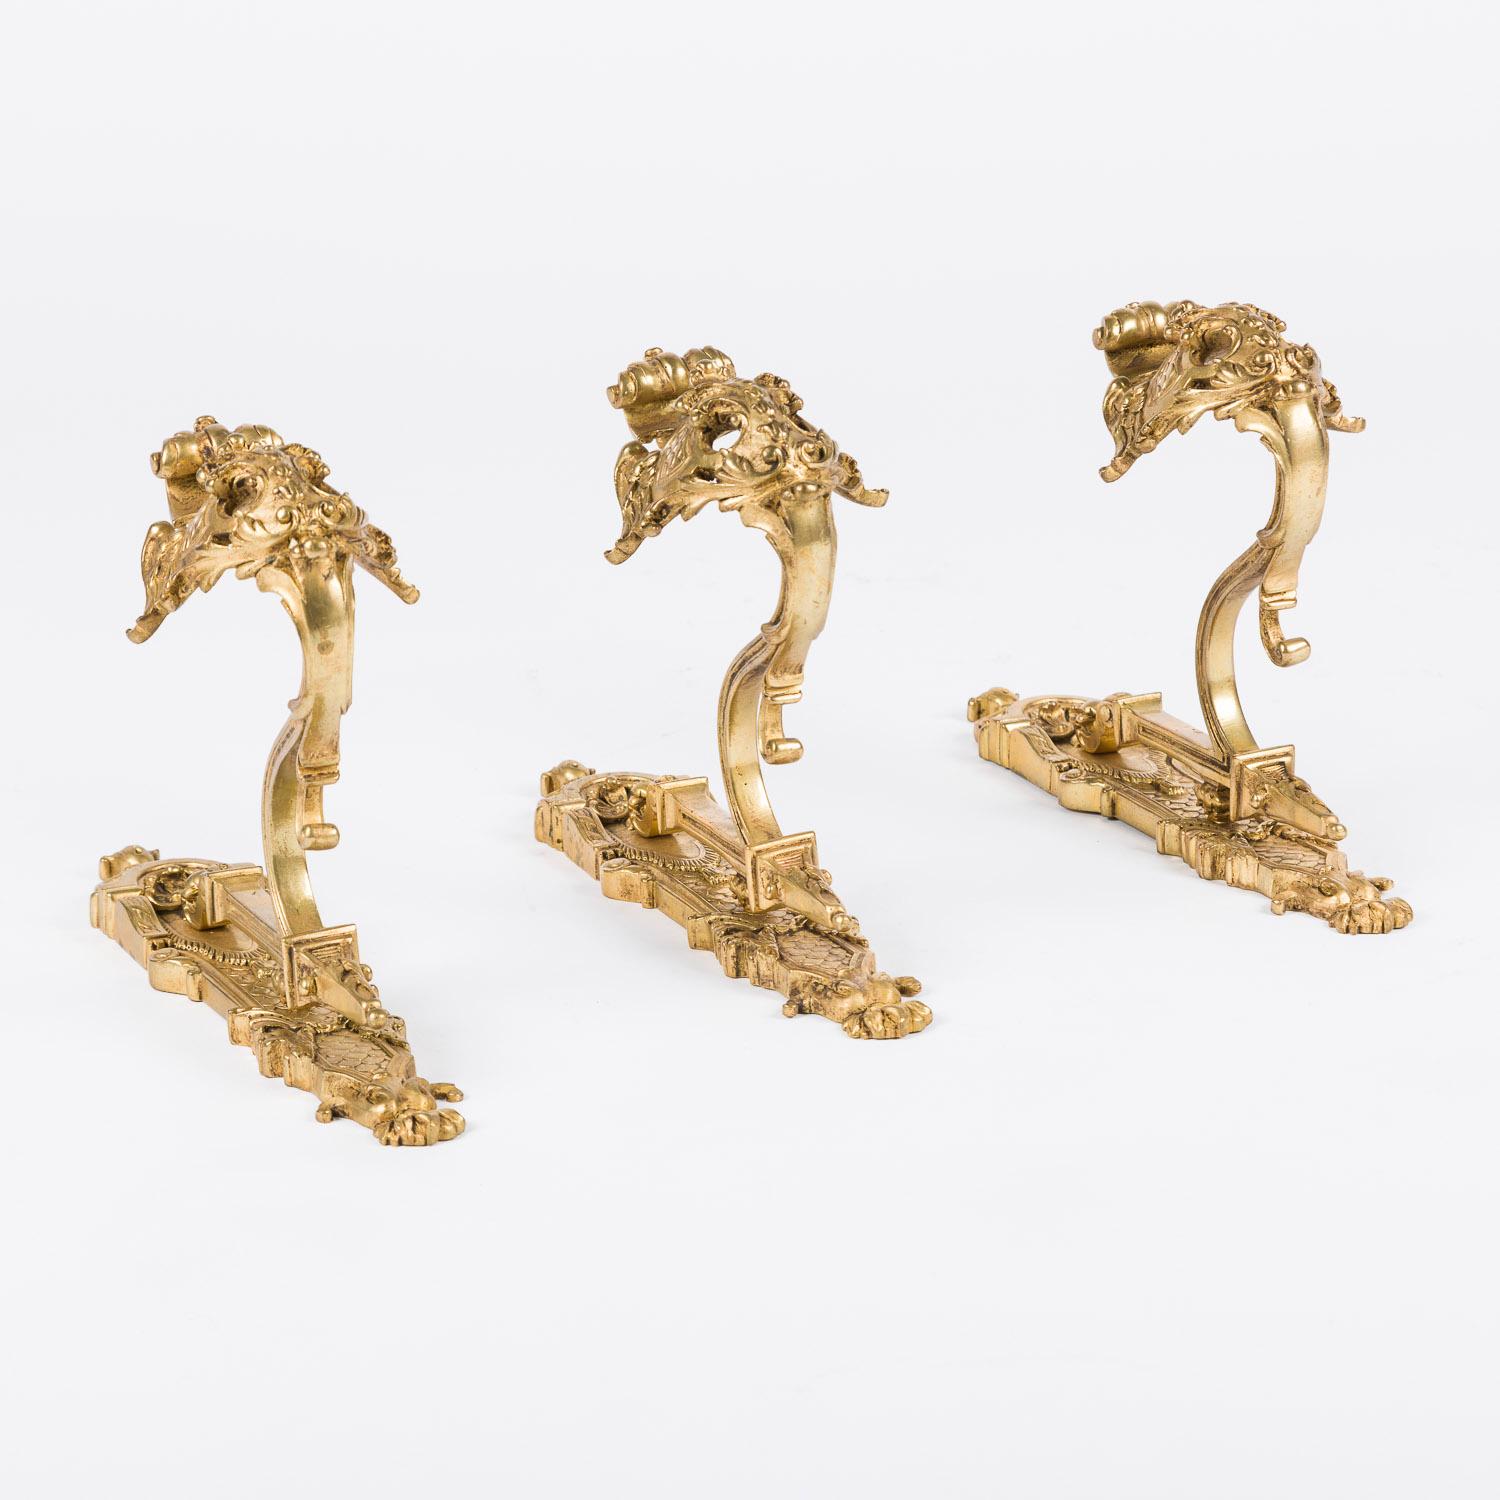 A set of three late 19th century French very ornate gilt bronze curtain hooks in the Louis XV style.

Foundry Mark: GH

Projection from wall: 7 inches.